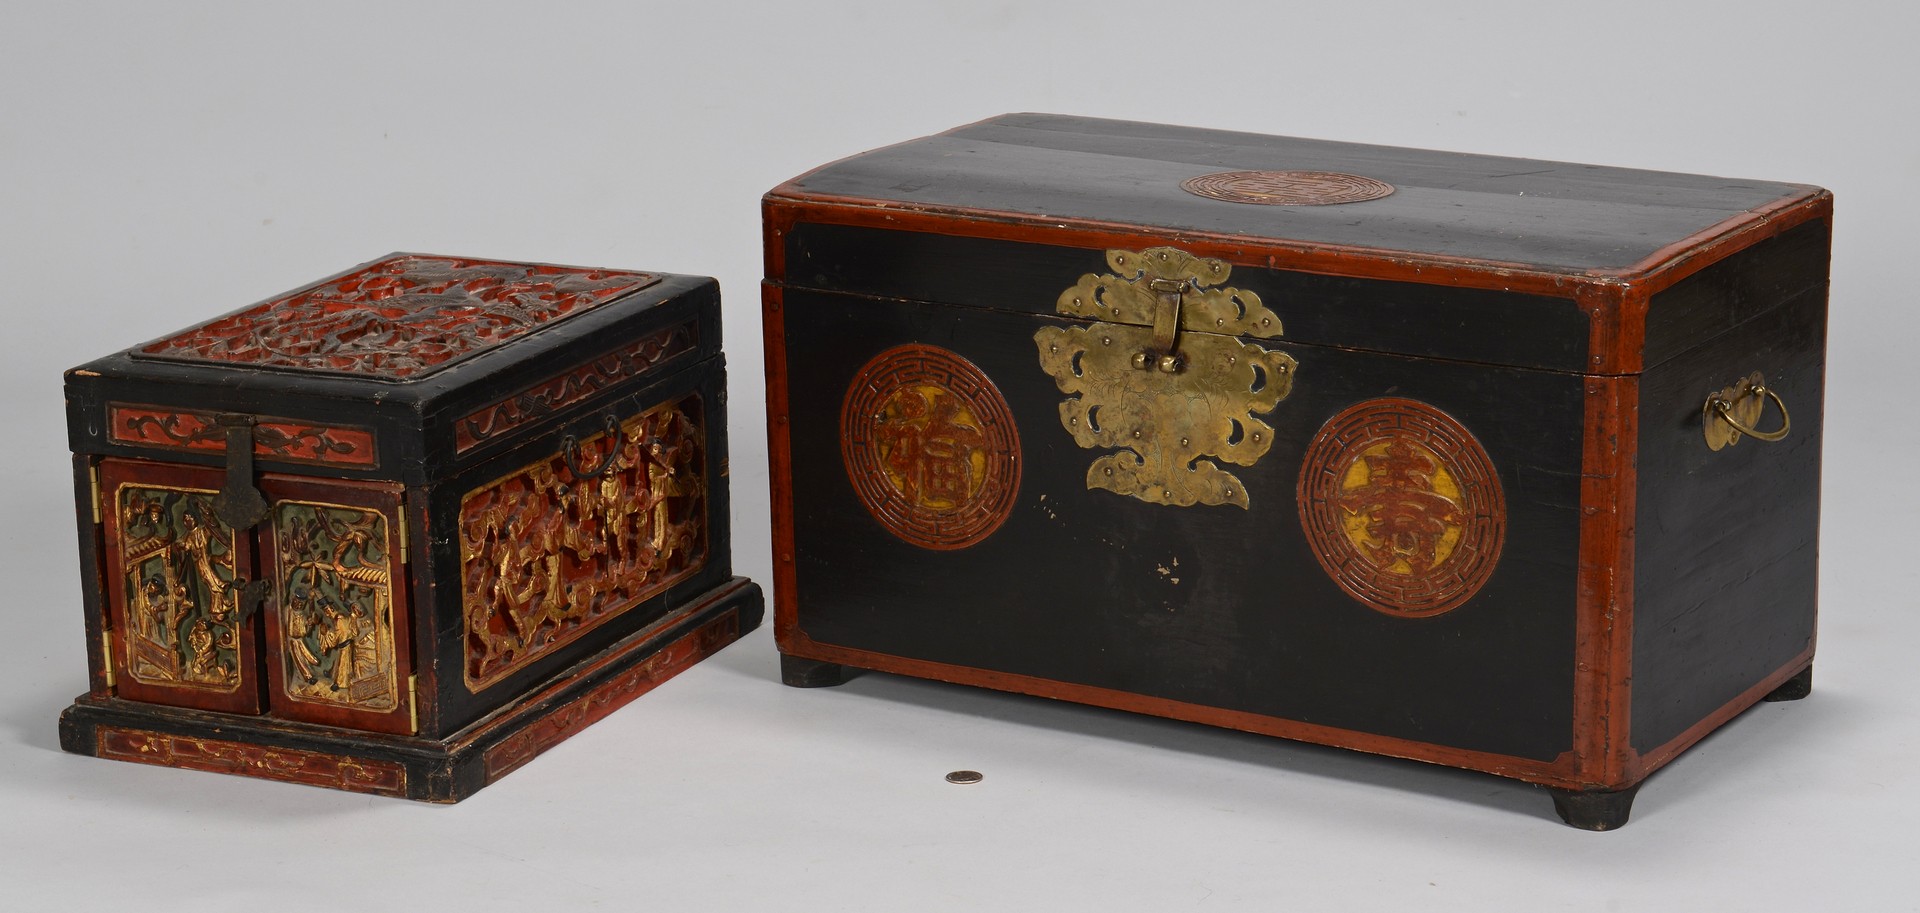 Lot 731: 2 Asian Lacquered Chests, 19th c.